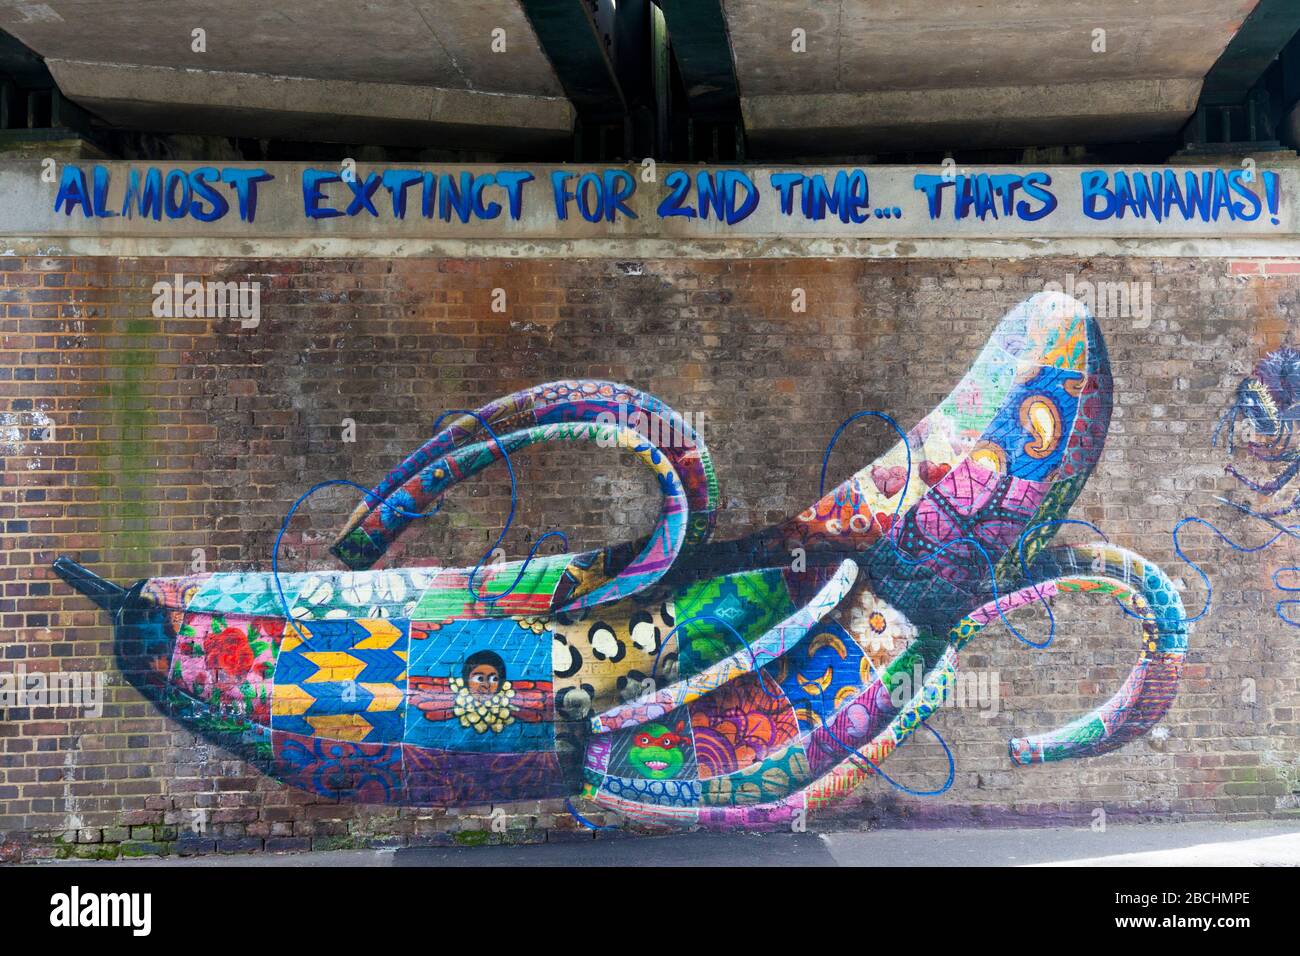 Street art on wall of a building in the back streets of Penge, South London, UK. Bananas almost extinct twice. Stock Photo